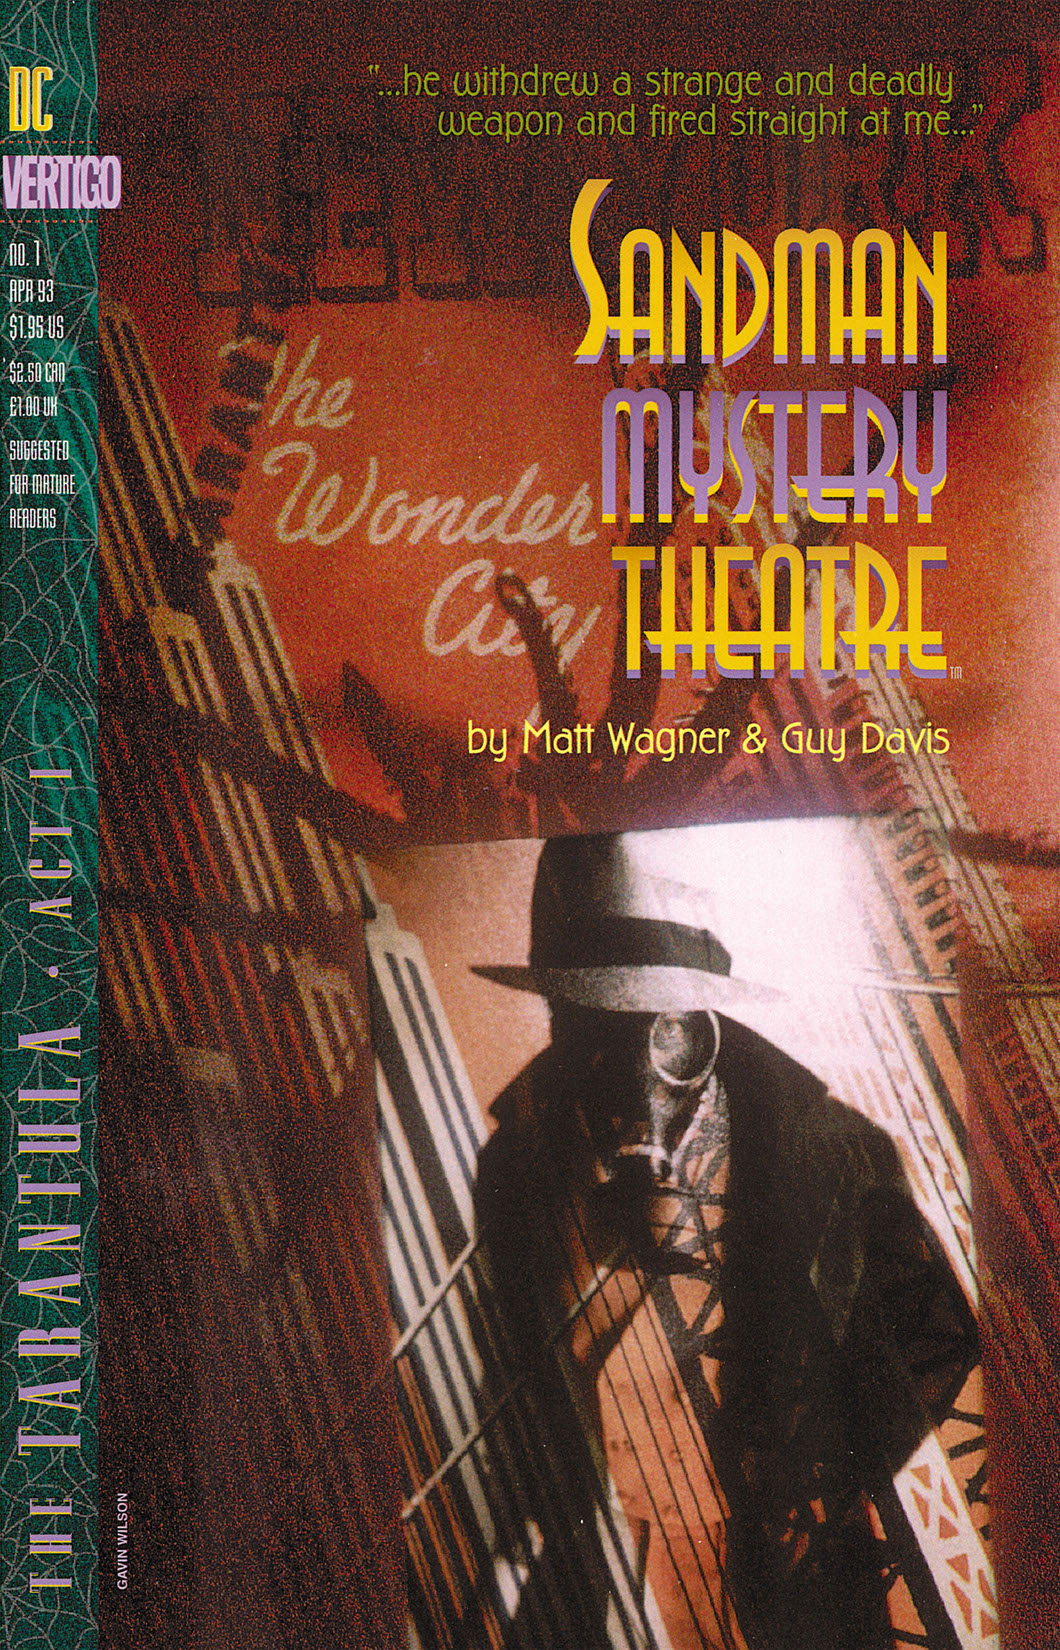 Sandman Mystery Theatre #1 preview images